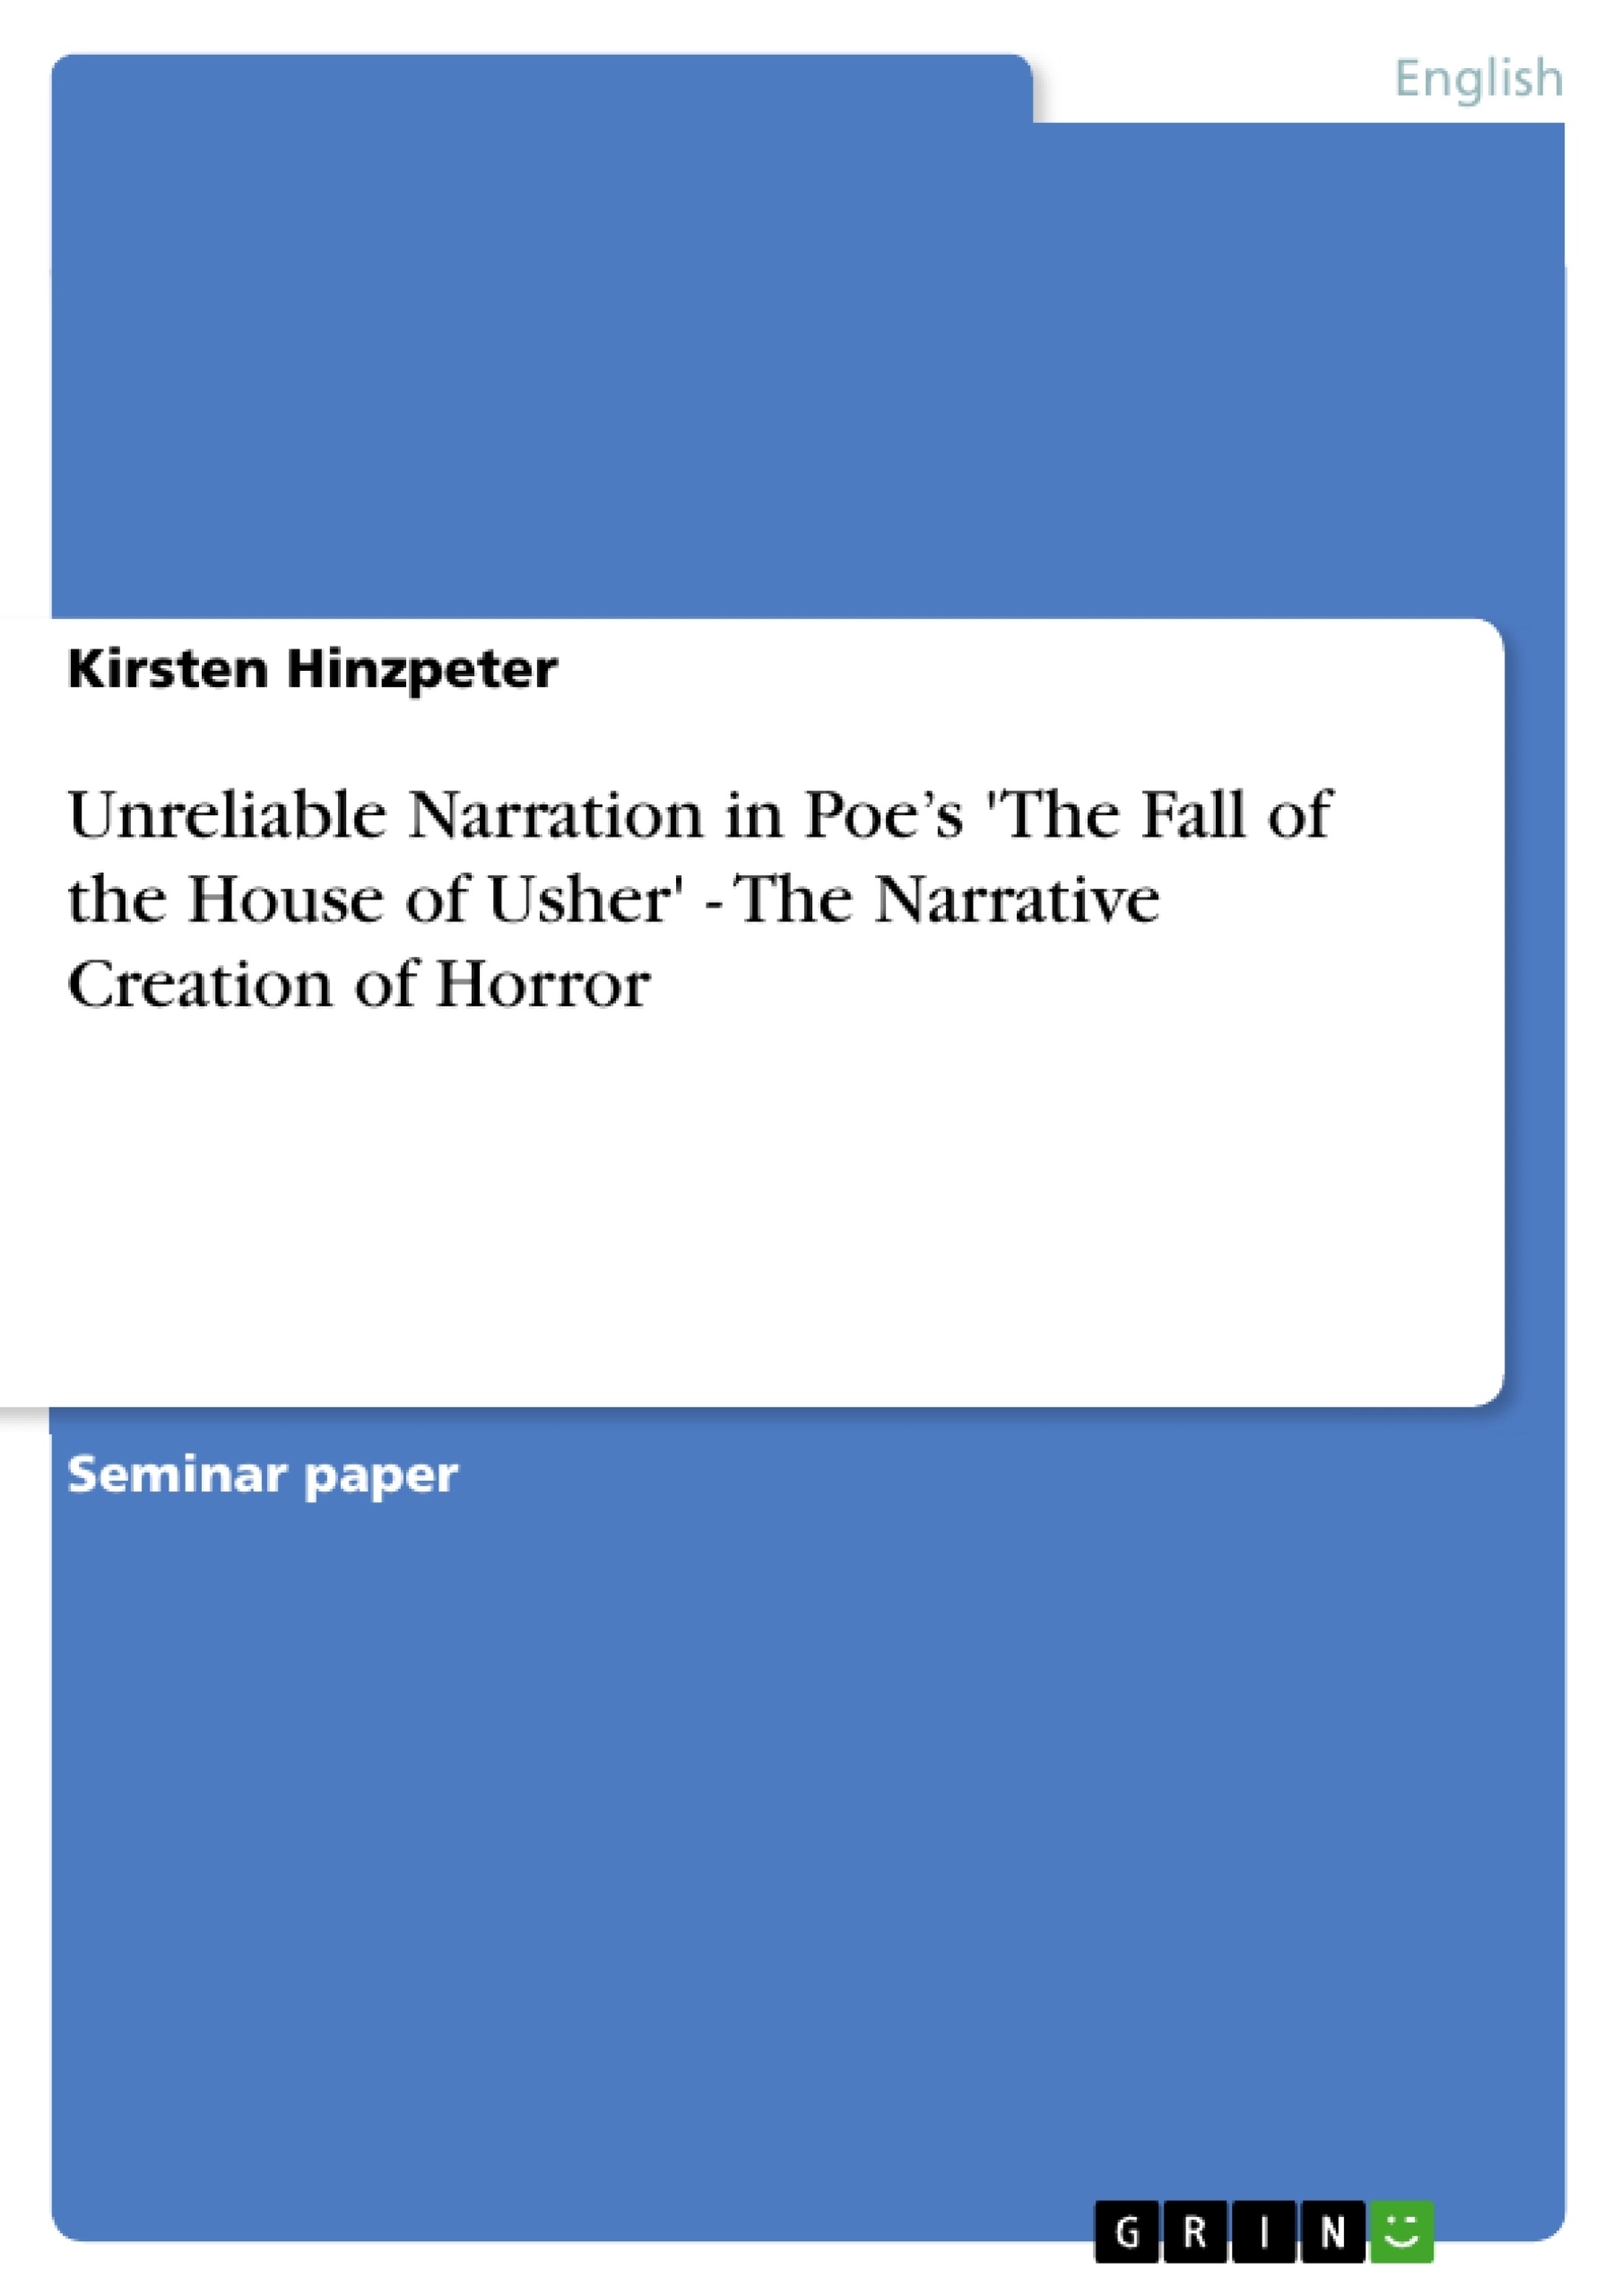 Title: Unreliable Narration in Poe’s 'The Fall of the House of Usher' - The Narrative Creation of Horror